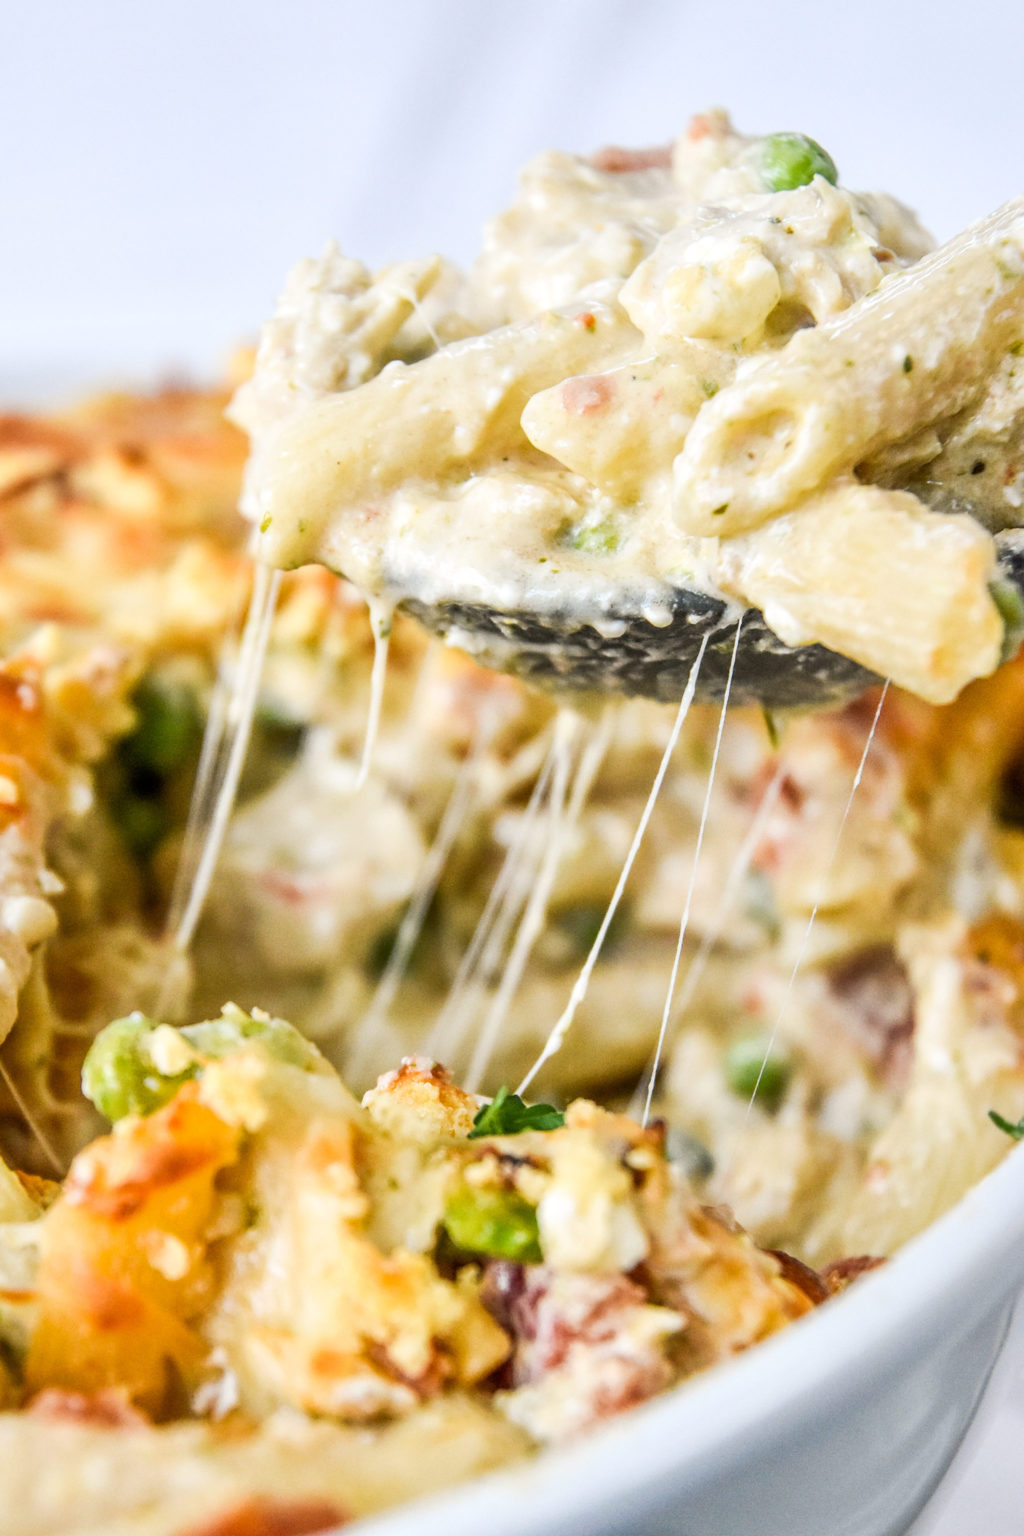 Creamy Pesto Pasta Chicken Bake with Peas - Project Meal Plan